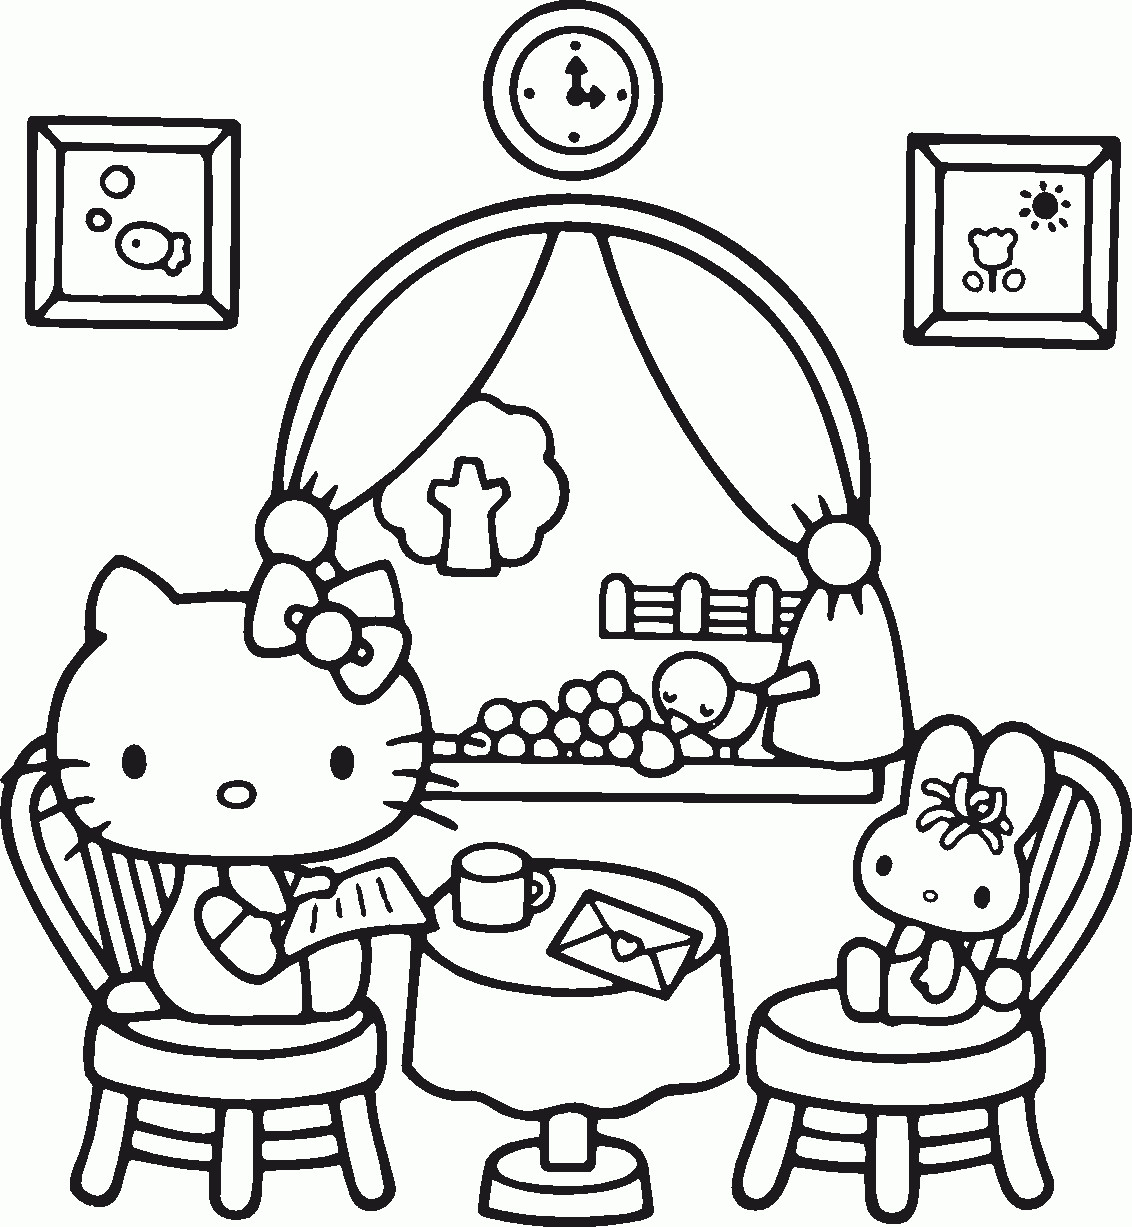 Free Preschool Coloring Sheets
 Free Colouring Pages For Kindergarten Go To School 1